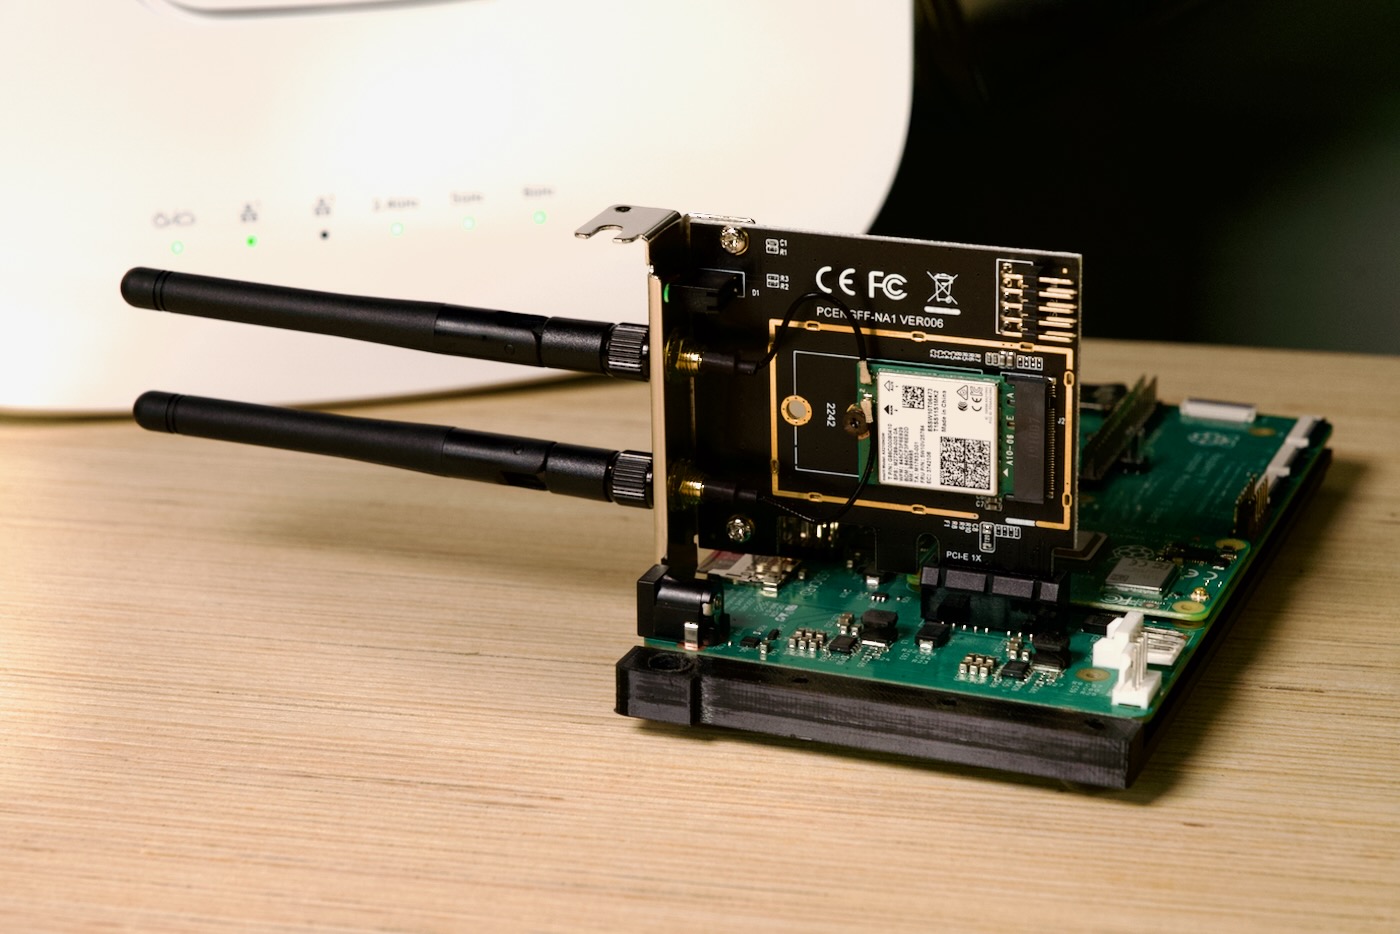 Getting to 1.5 Gbps WiFi 6E on the Raspberry Pi CM4